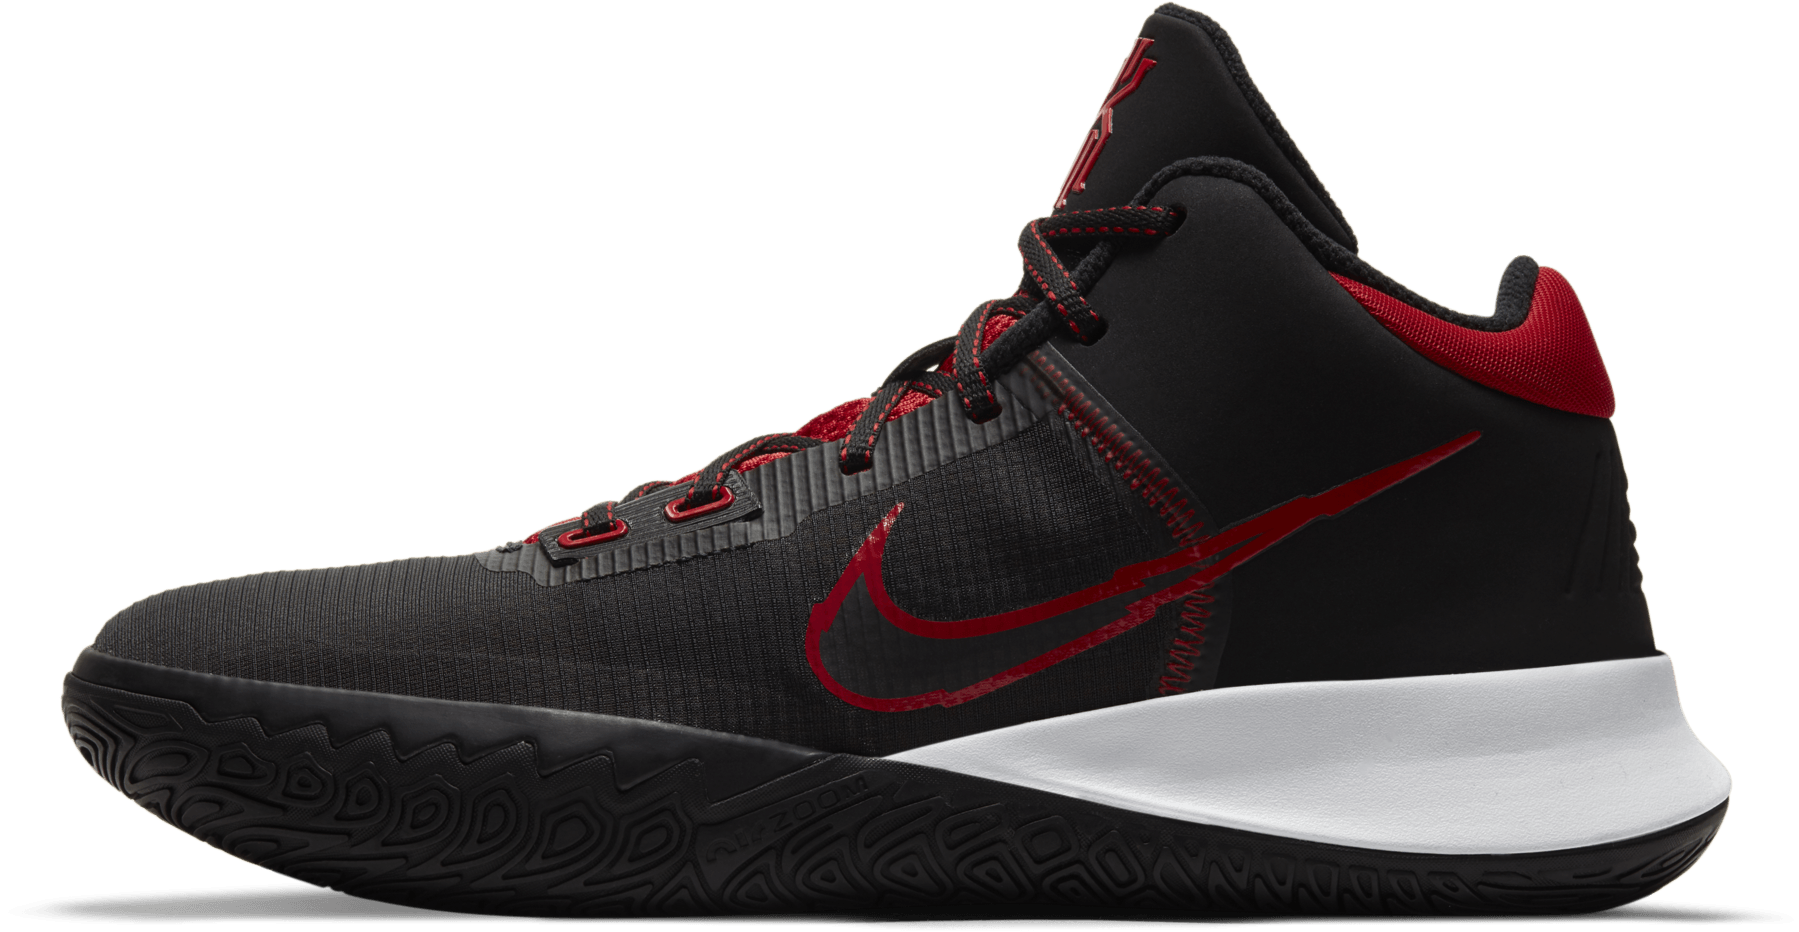 Nike Kyrie Flytrap 4 - Review, Deals, Pics of 15 Colorways